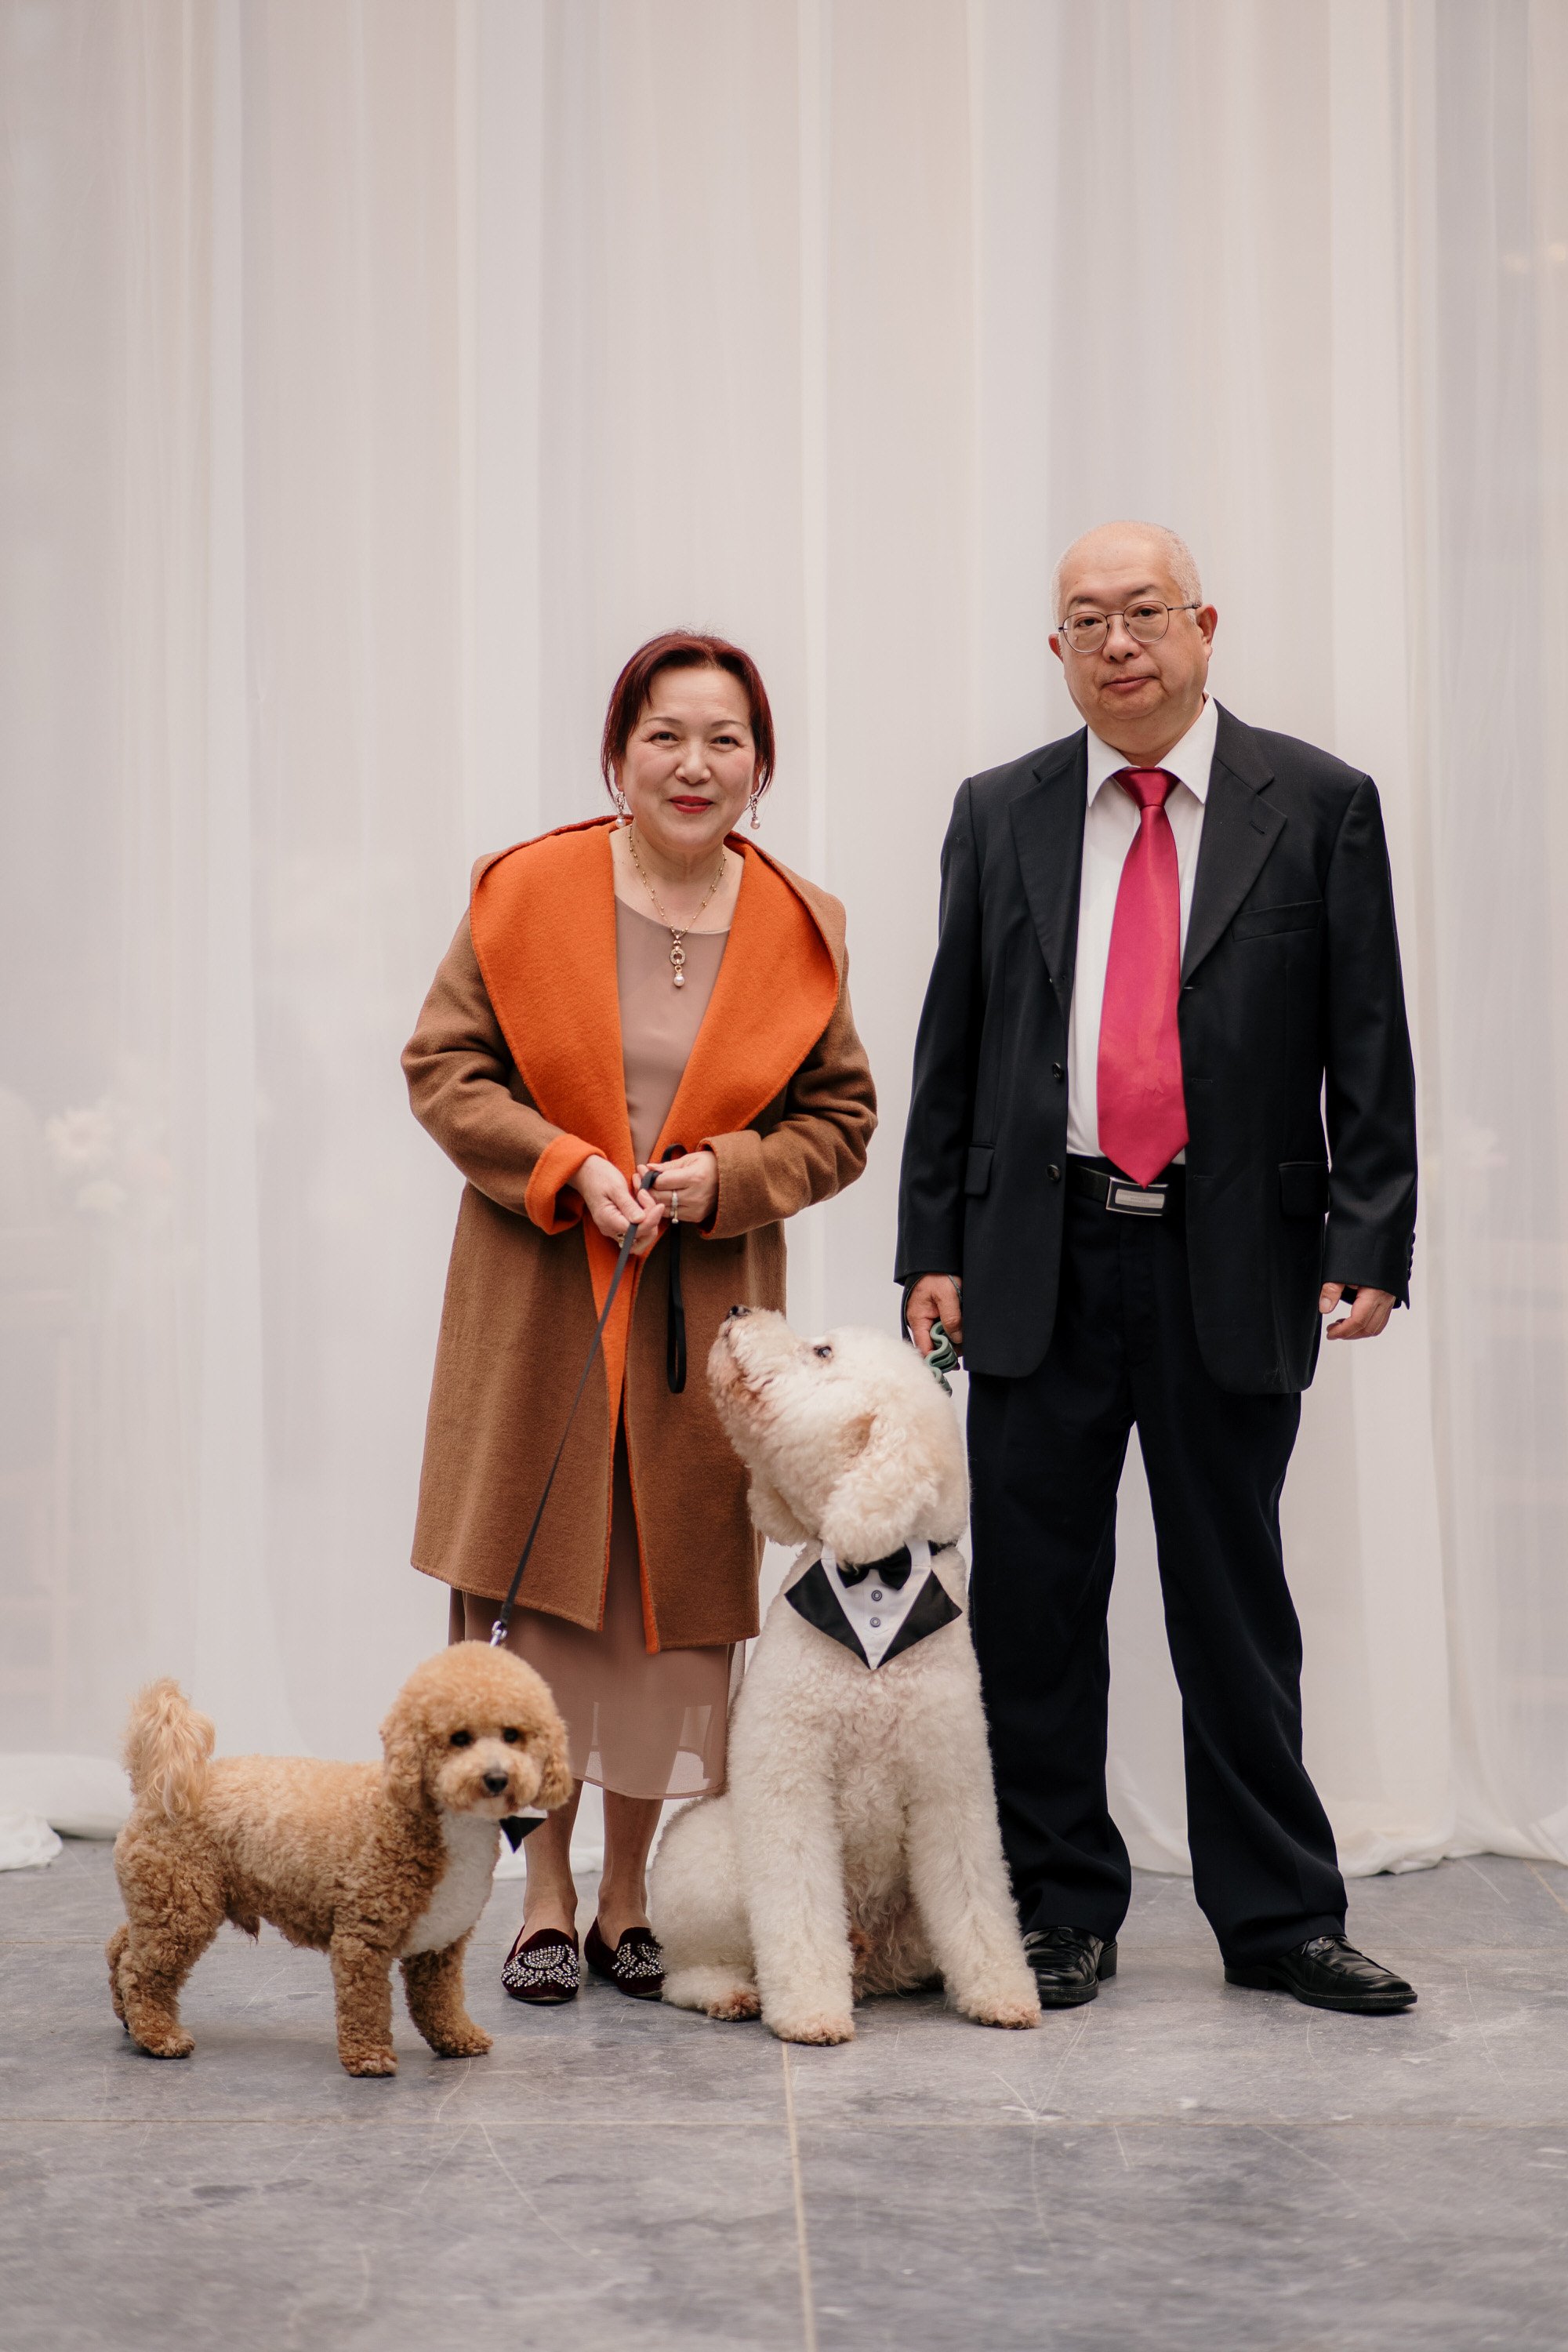 glasshouse-morningside-top-auckland-wedding-phtographer-2023-photography-videography-film-new-zealand-NZ-best-urban-venue-traditional-chinese-ceremony-spring-colourful-pet-dog-dear-white-production (26).jpg